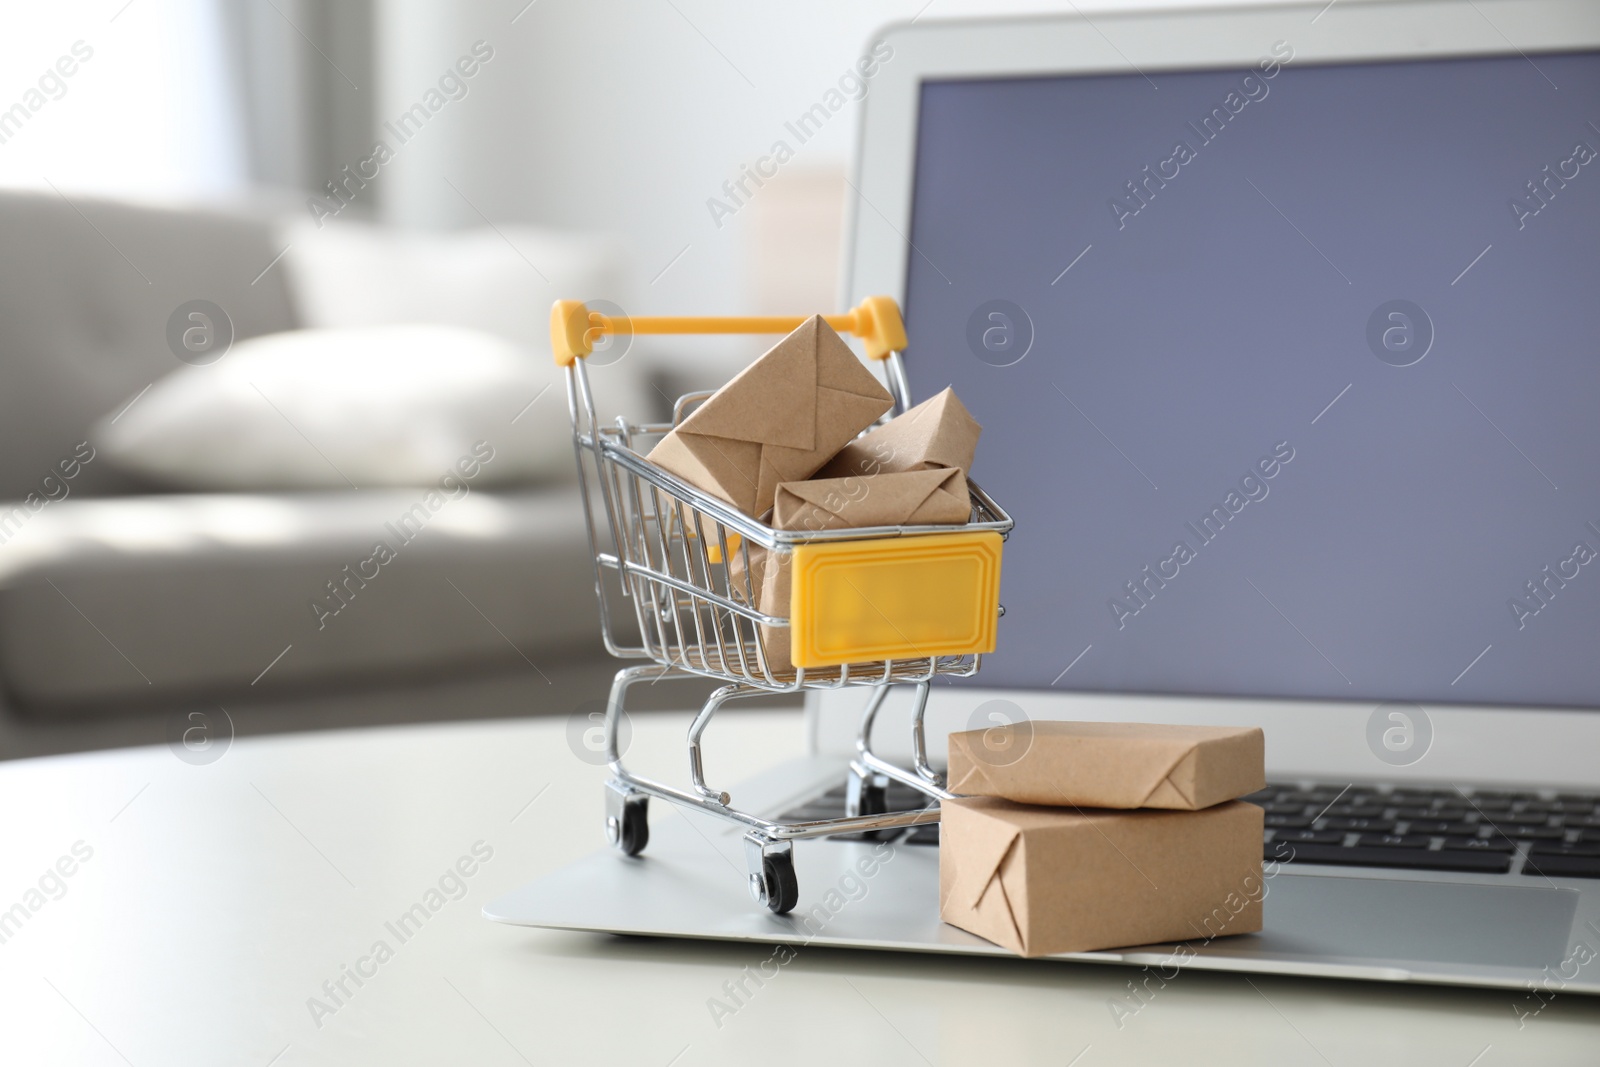 Photo of Internet shopping. Laptop and small cart with boxes on table indoors